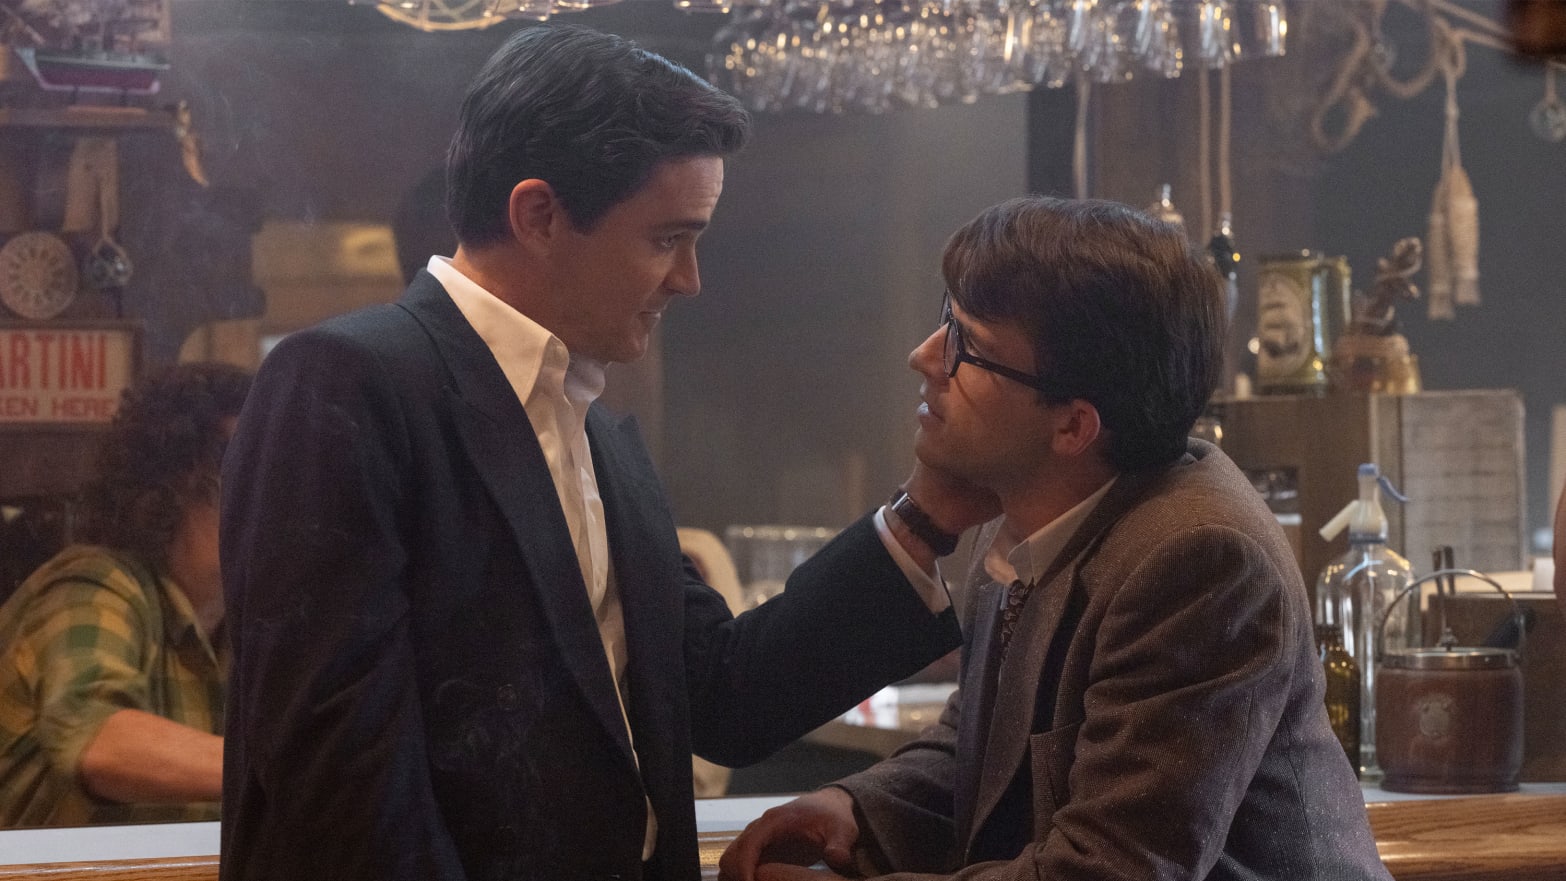  Matt Bomer touches Jonathan Bailey's face while they sit at a bar in a still from 'Fellow Travelers'